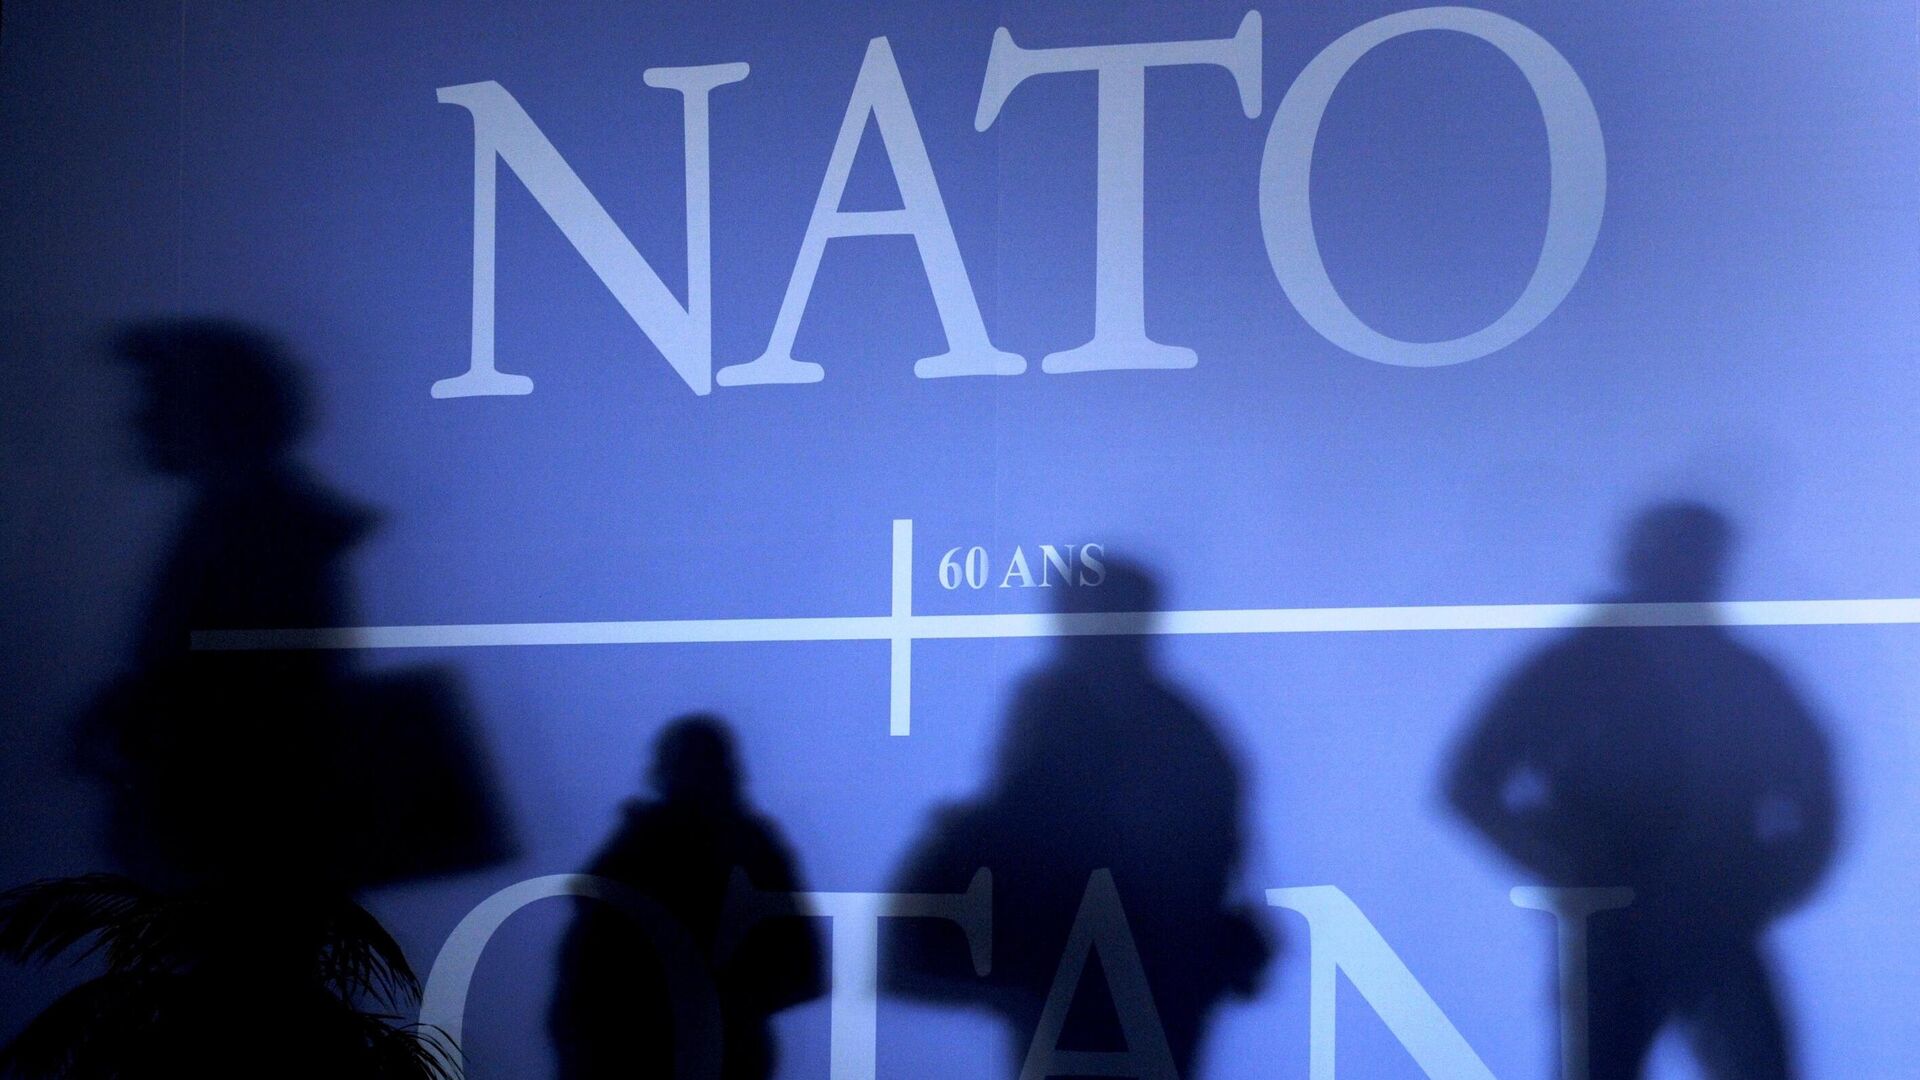 This April 2, 2009 file photo shows shadows cast on a wall decorated with the NATO logo and flags of NATO countries in Strasbourg, eastern France, before the start of the NATO summit which marked the organisation's 60th anniversary.  - Sputnik International, 1920, 12.05.2022